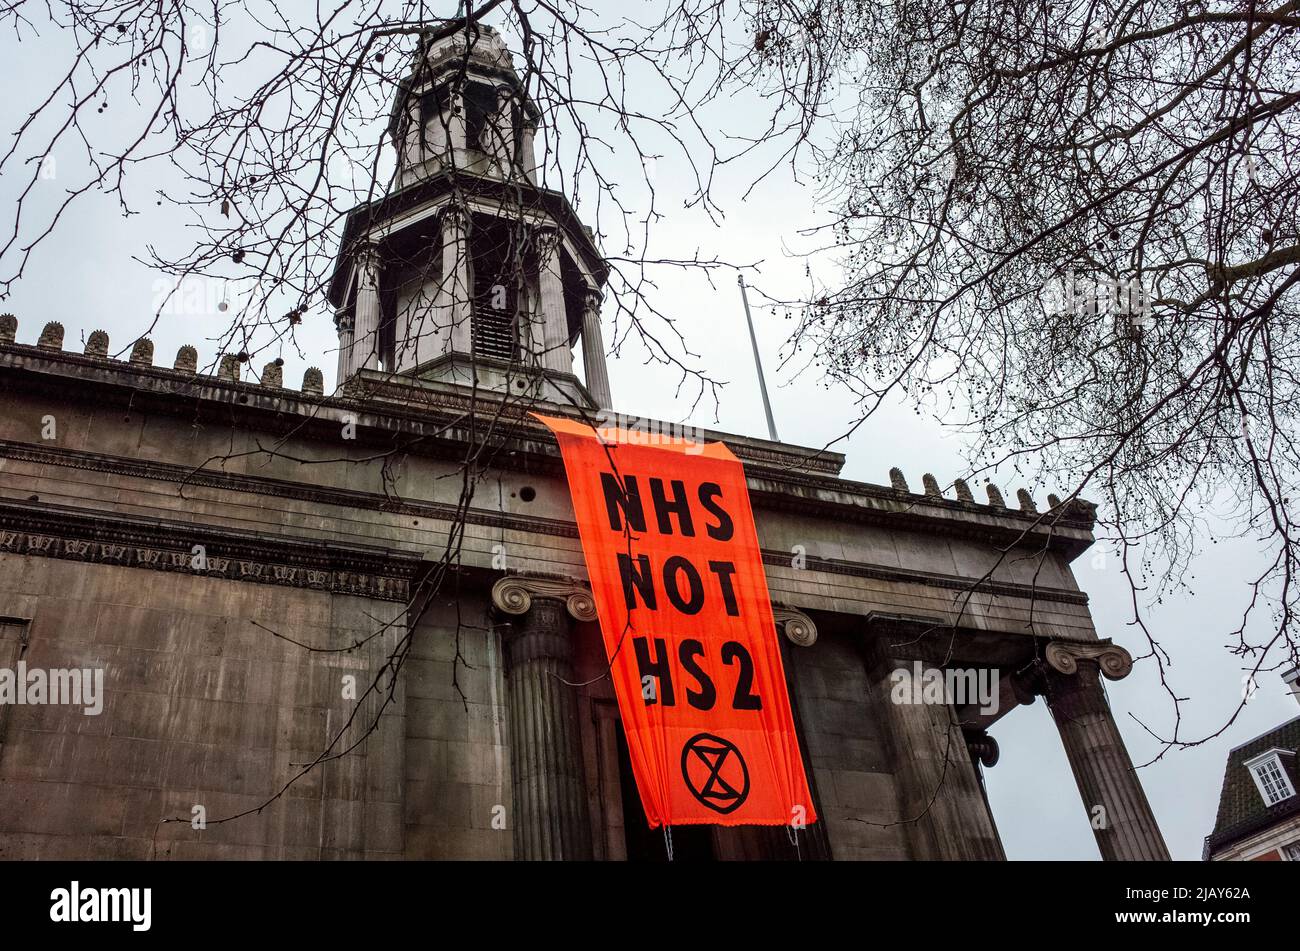 'NHS not HS2' campaign banner hangs on St Pancras New Church along Euston Road, outside Euston train station in London - 2021 Stock Photo